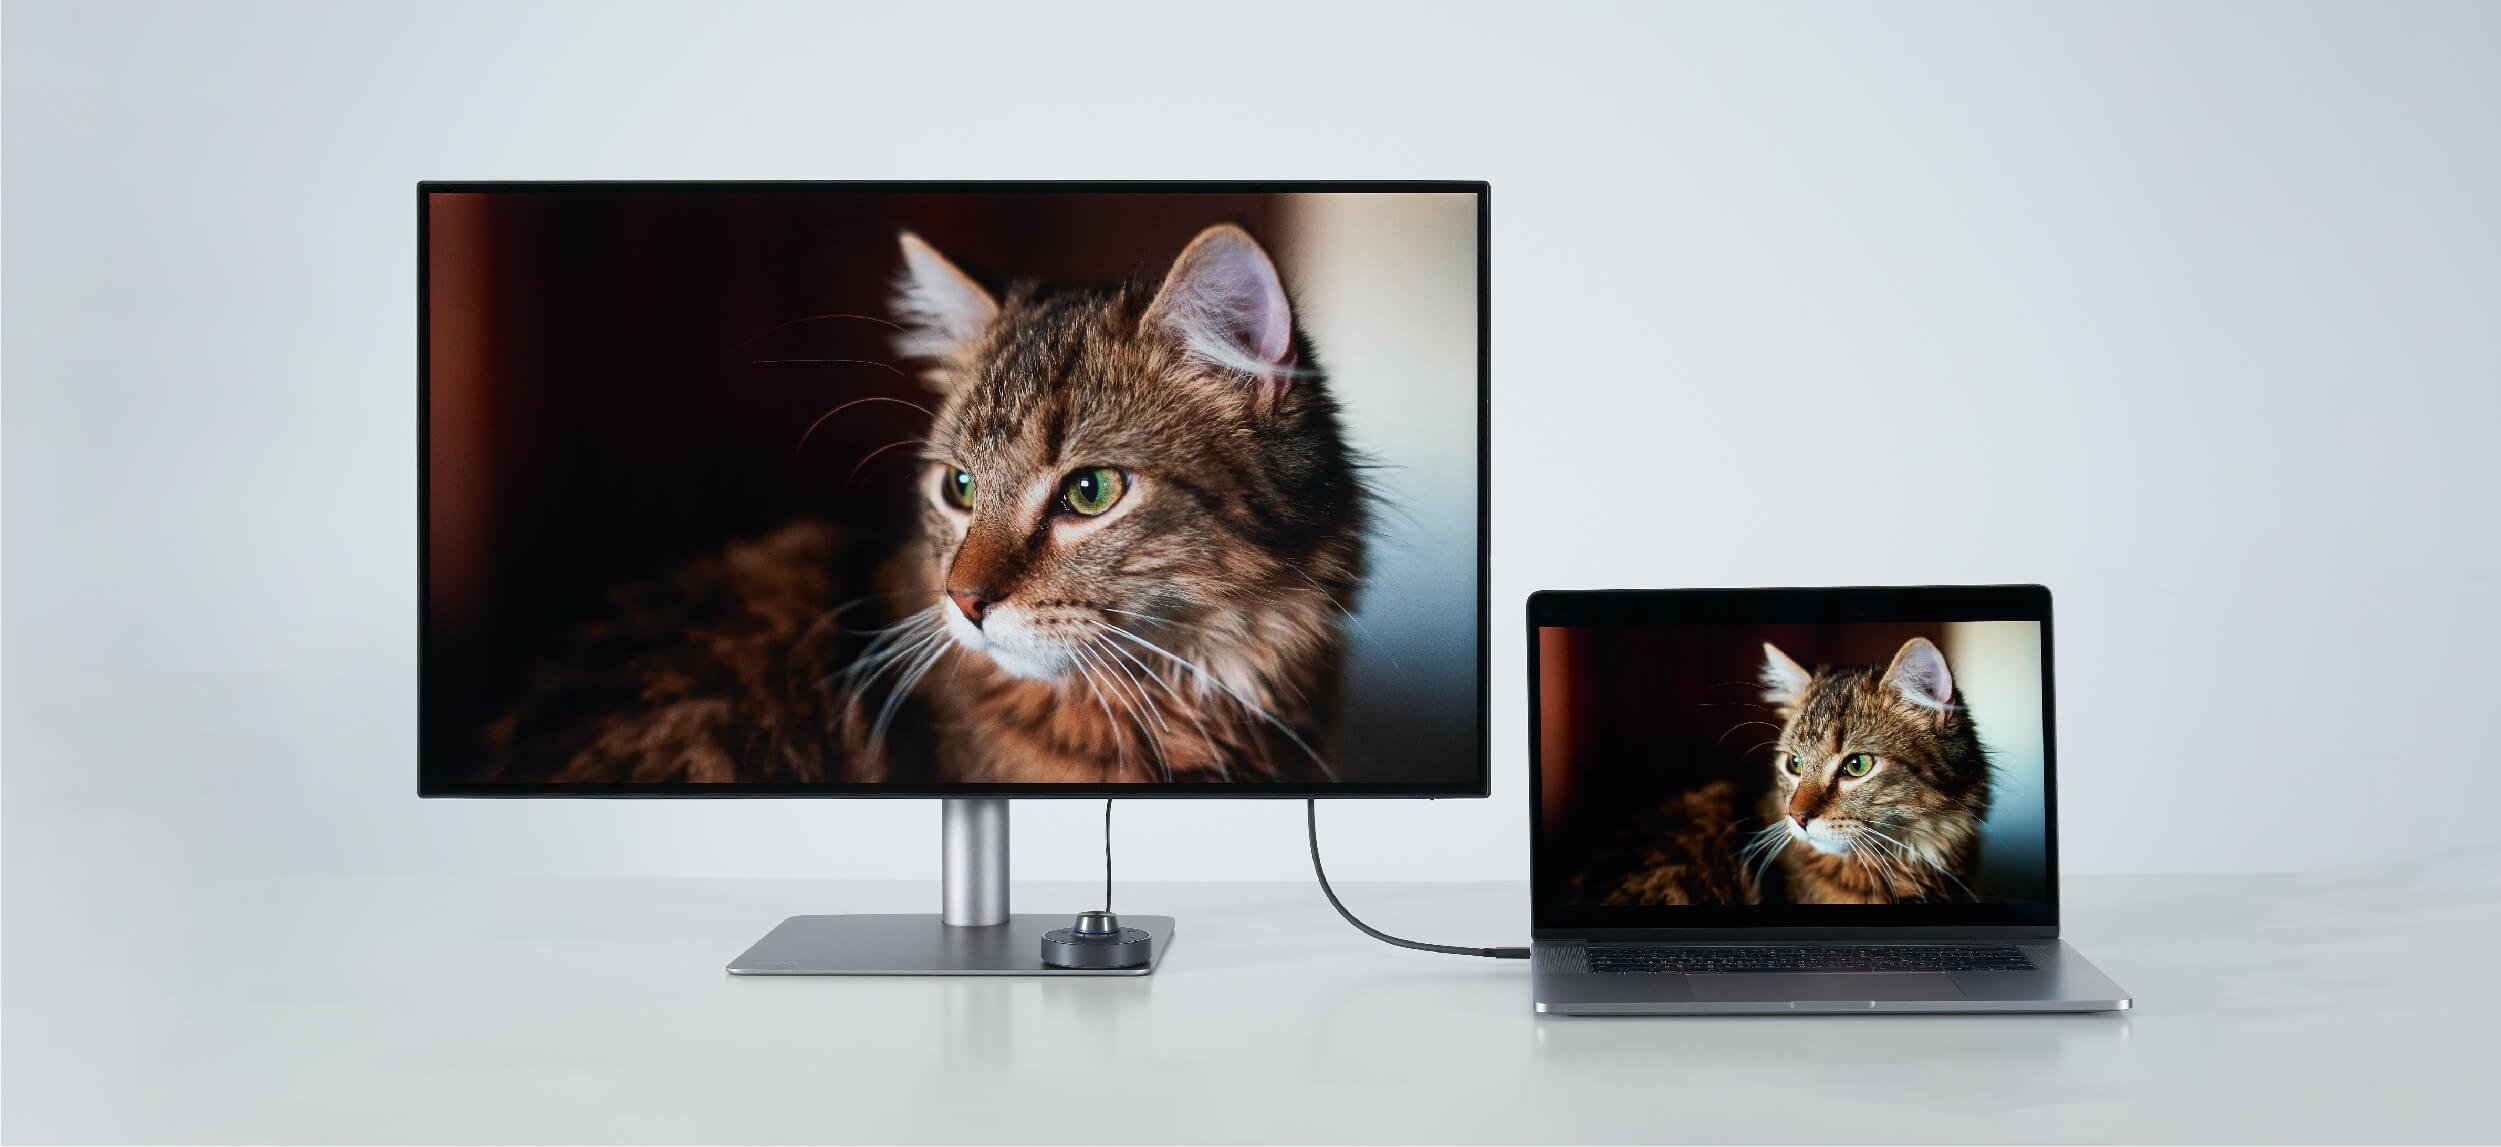 Dedicated M-Book Mode is BenQ’s color technology that helps you transition from Mac to BenQ monitor seamlessly.